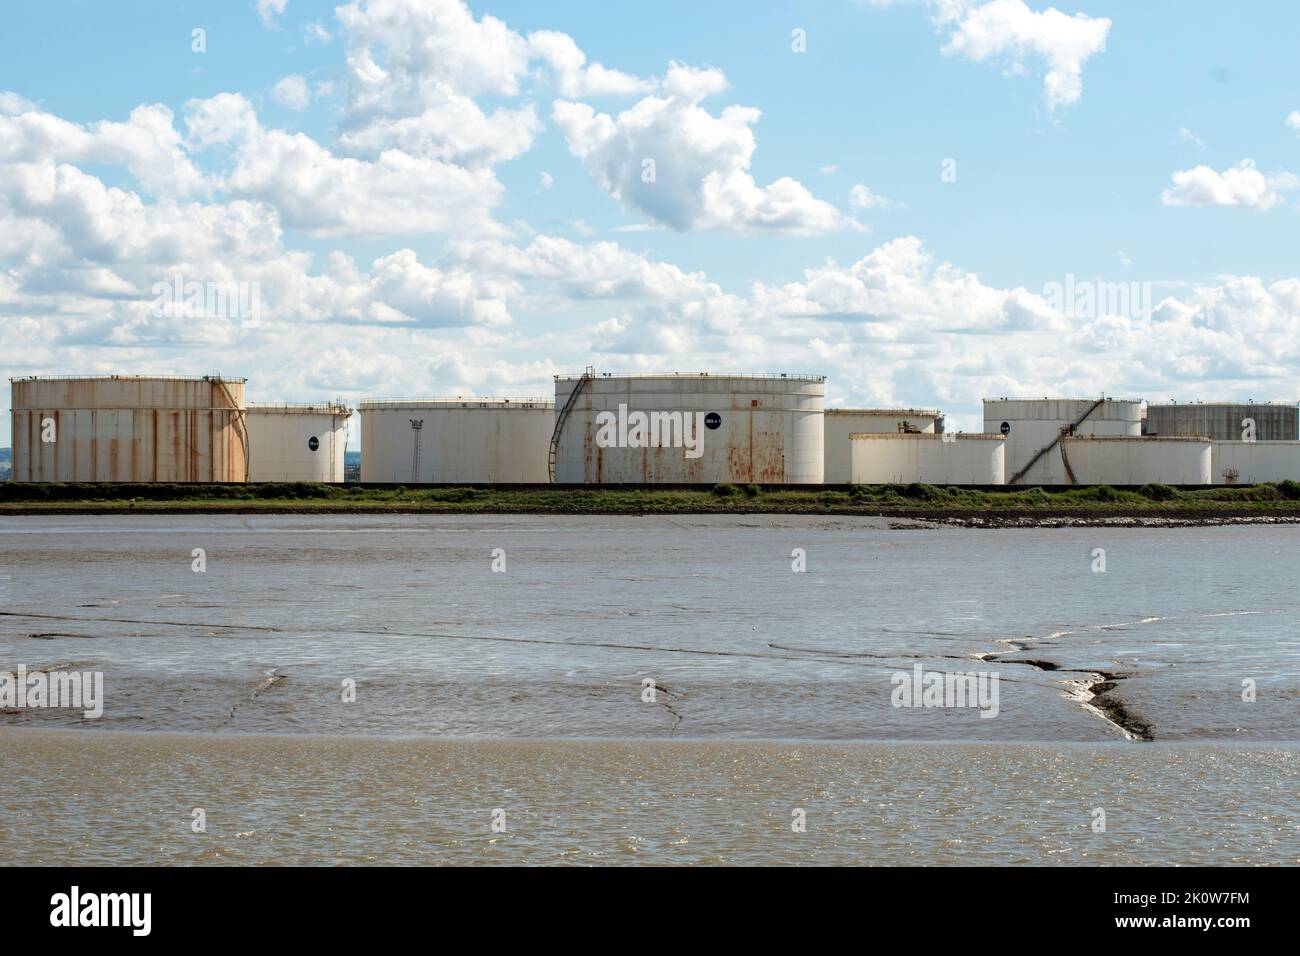 Oil storage tanks at Coryton Refinery in Essex, England, on the estuary of the River Thames, England, UK. Stock Photo